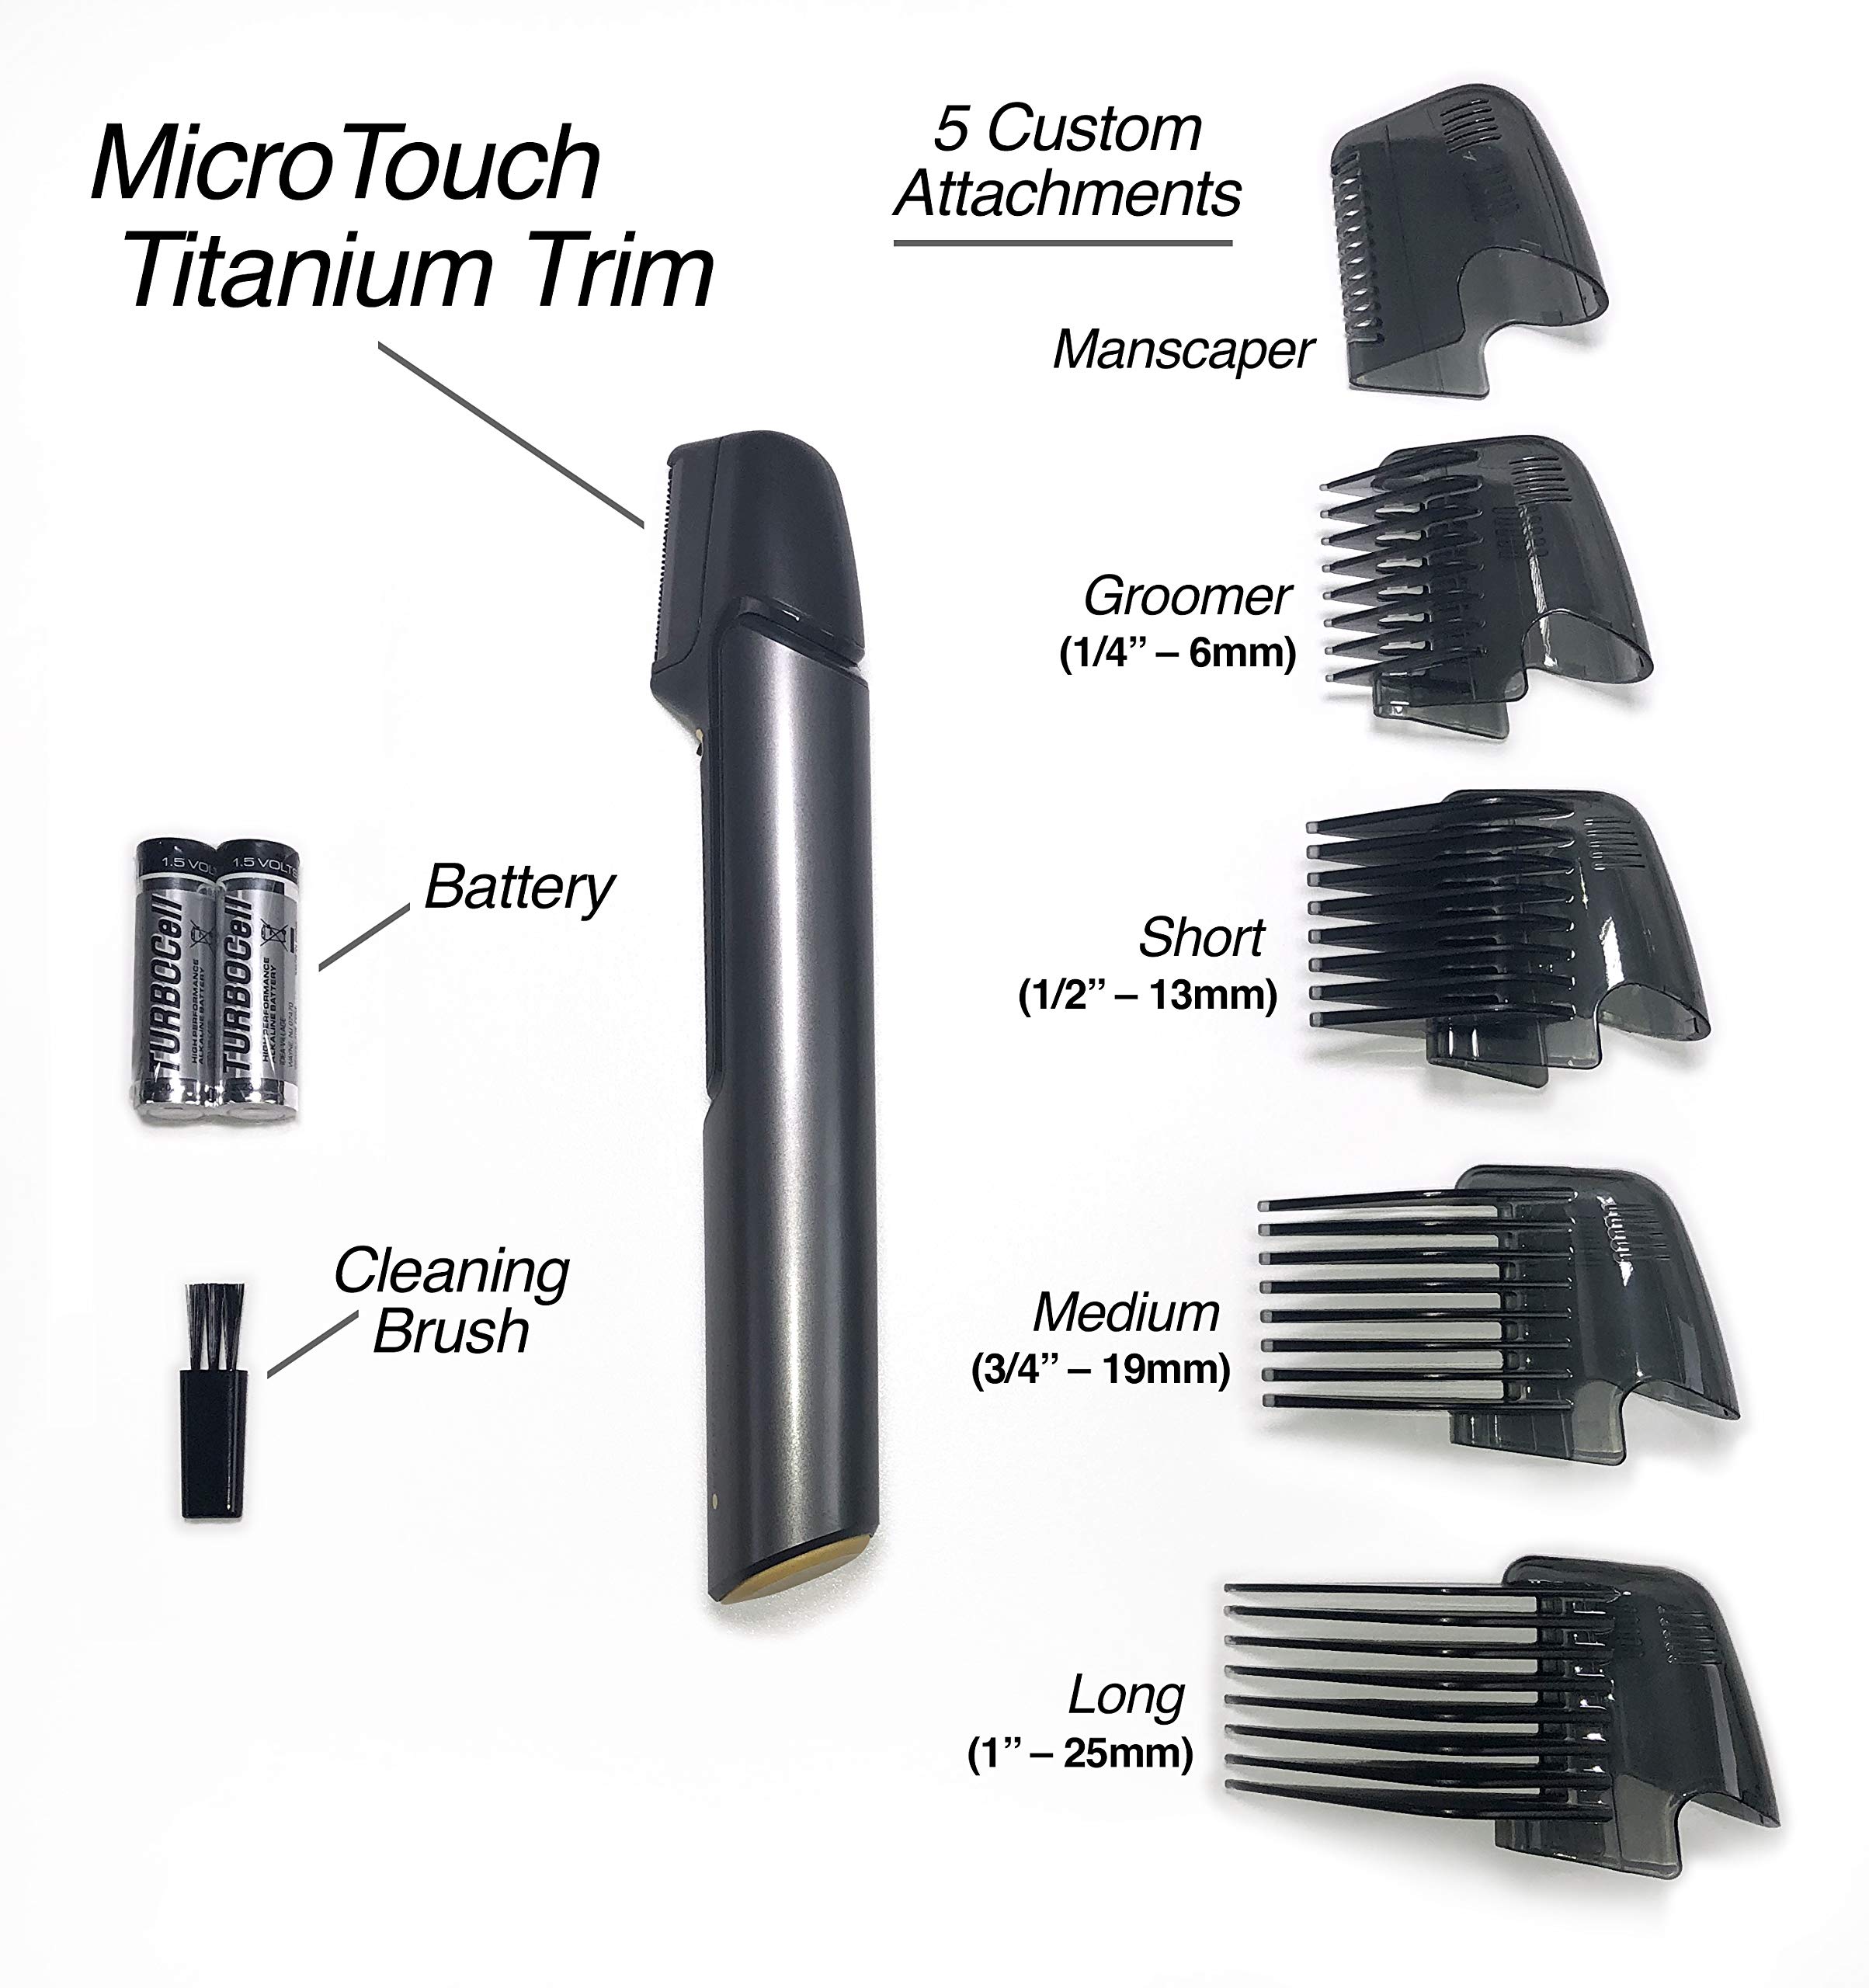 Micro Touch Titanium Trim, Lighted Hair Cutting Tool and Body Groomer